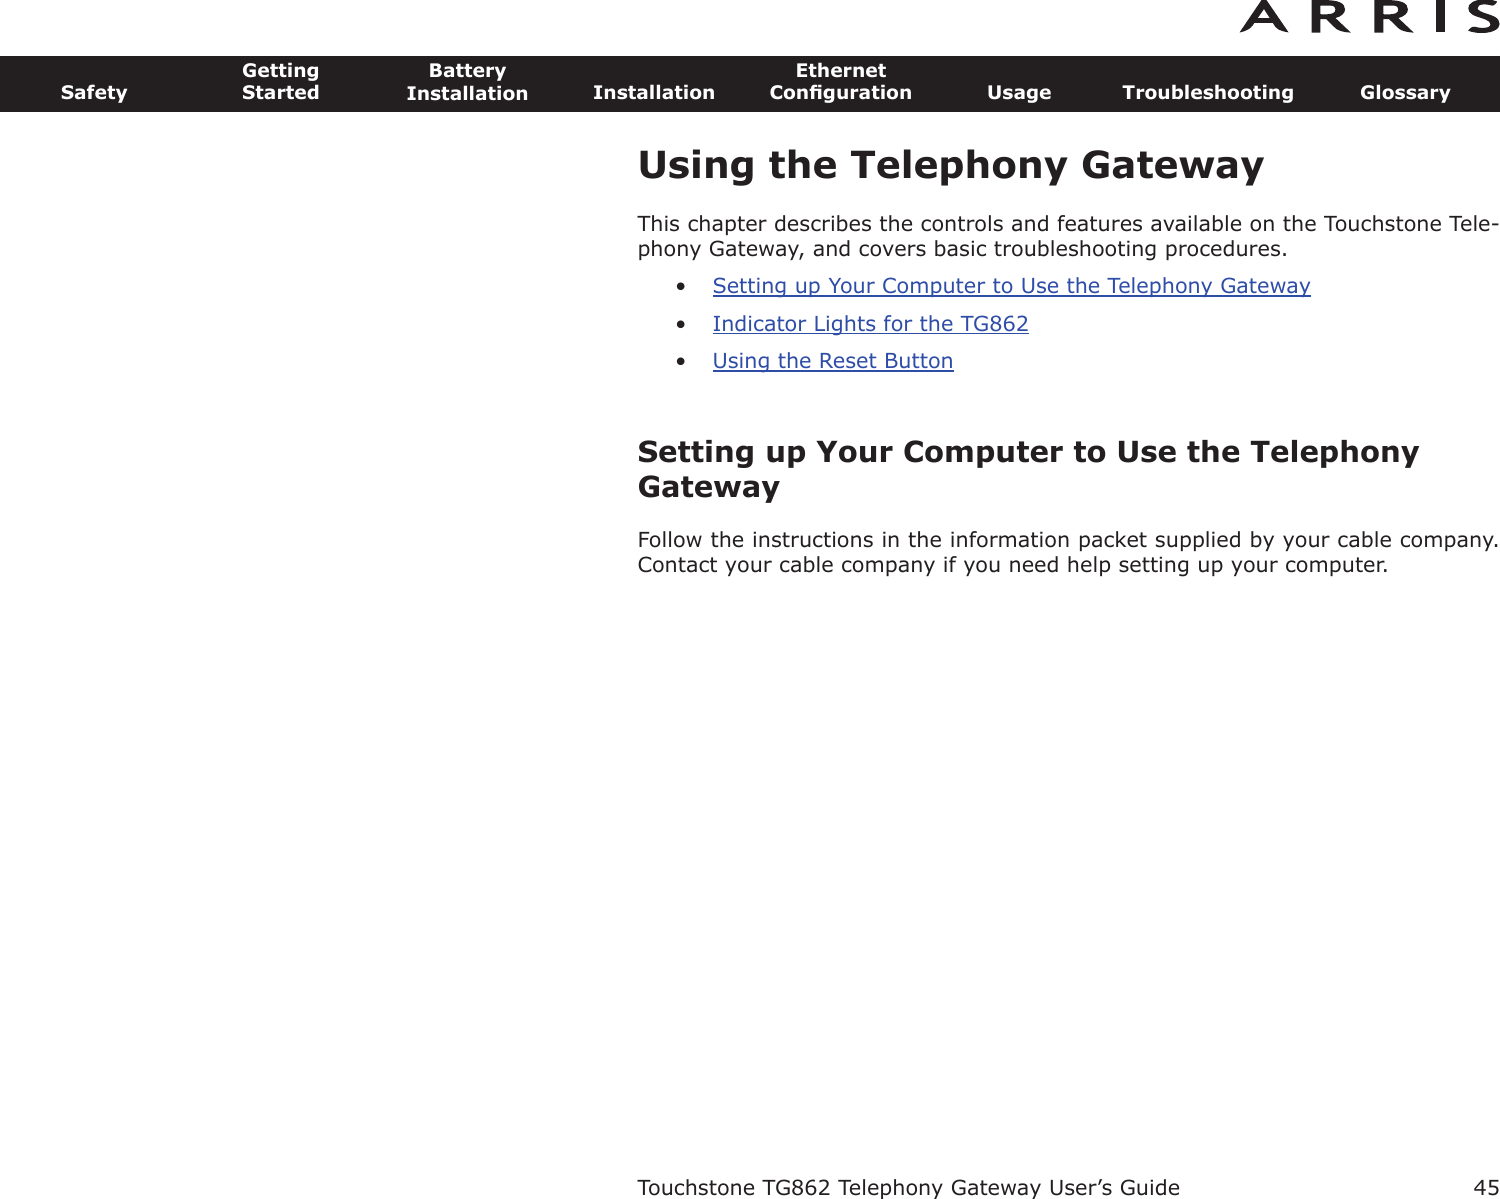 45SafetyGettingStartedBatteryInstallation InstallationEthernetConﬁguration Usage Troubleshooting GlossaryTouchstone TG862 Telephony Gateway User’s GuideUsing the Telephony GatewayThis chapter describes the controls and features available on the Touchstone Tele-phony Gateway, and covers basic troubleshooting procedures.•Setting up Your Computer to Use the Telephony Gateway•Indicator Lights for the TG862•Using the Reset ButtonSetting up Your Computer to Use the TelephonyGatewayFollow the instructions in the information packet supplied by your cable company.Contact your cable company if you need help setting up your computer.